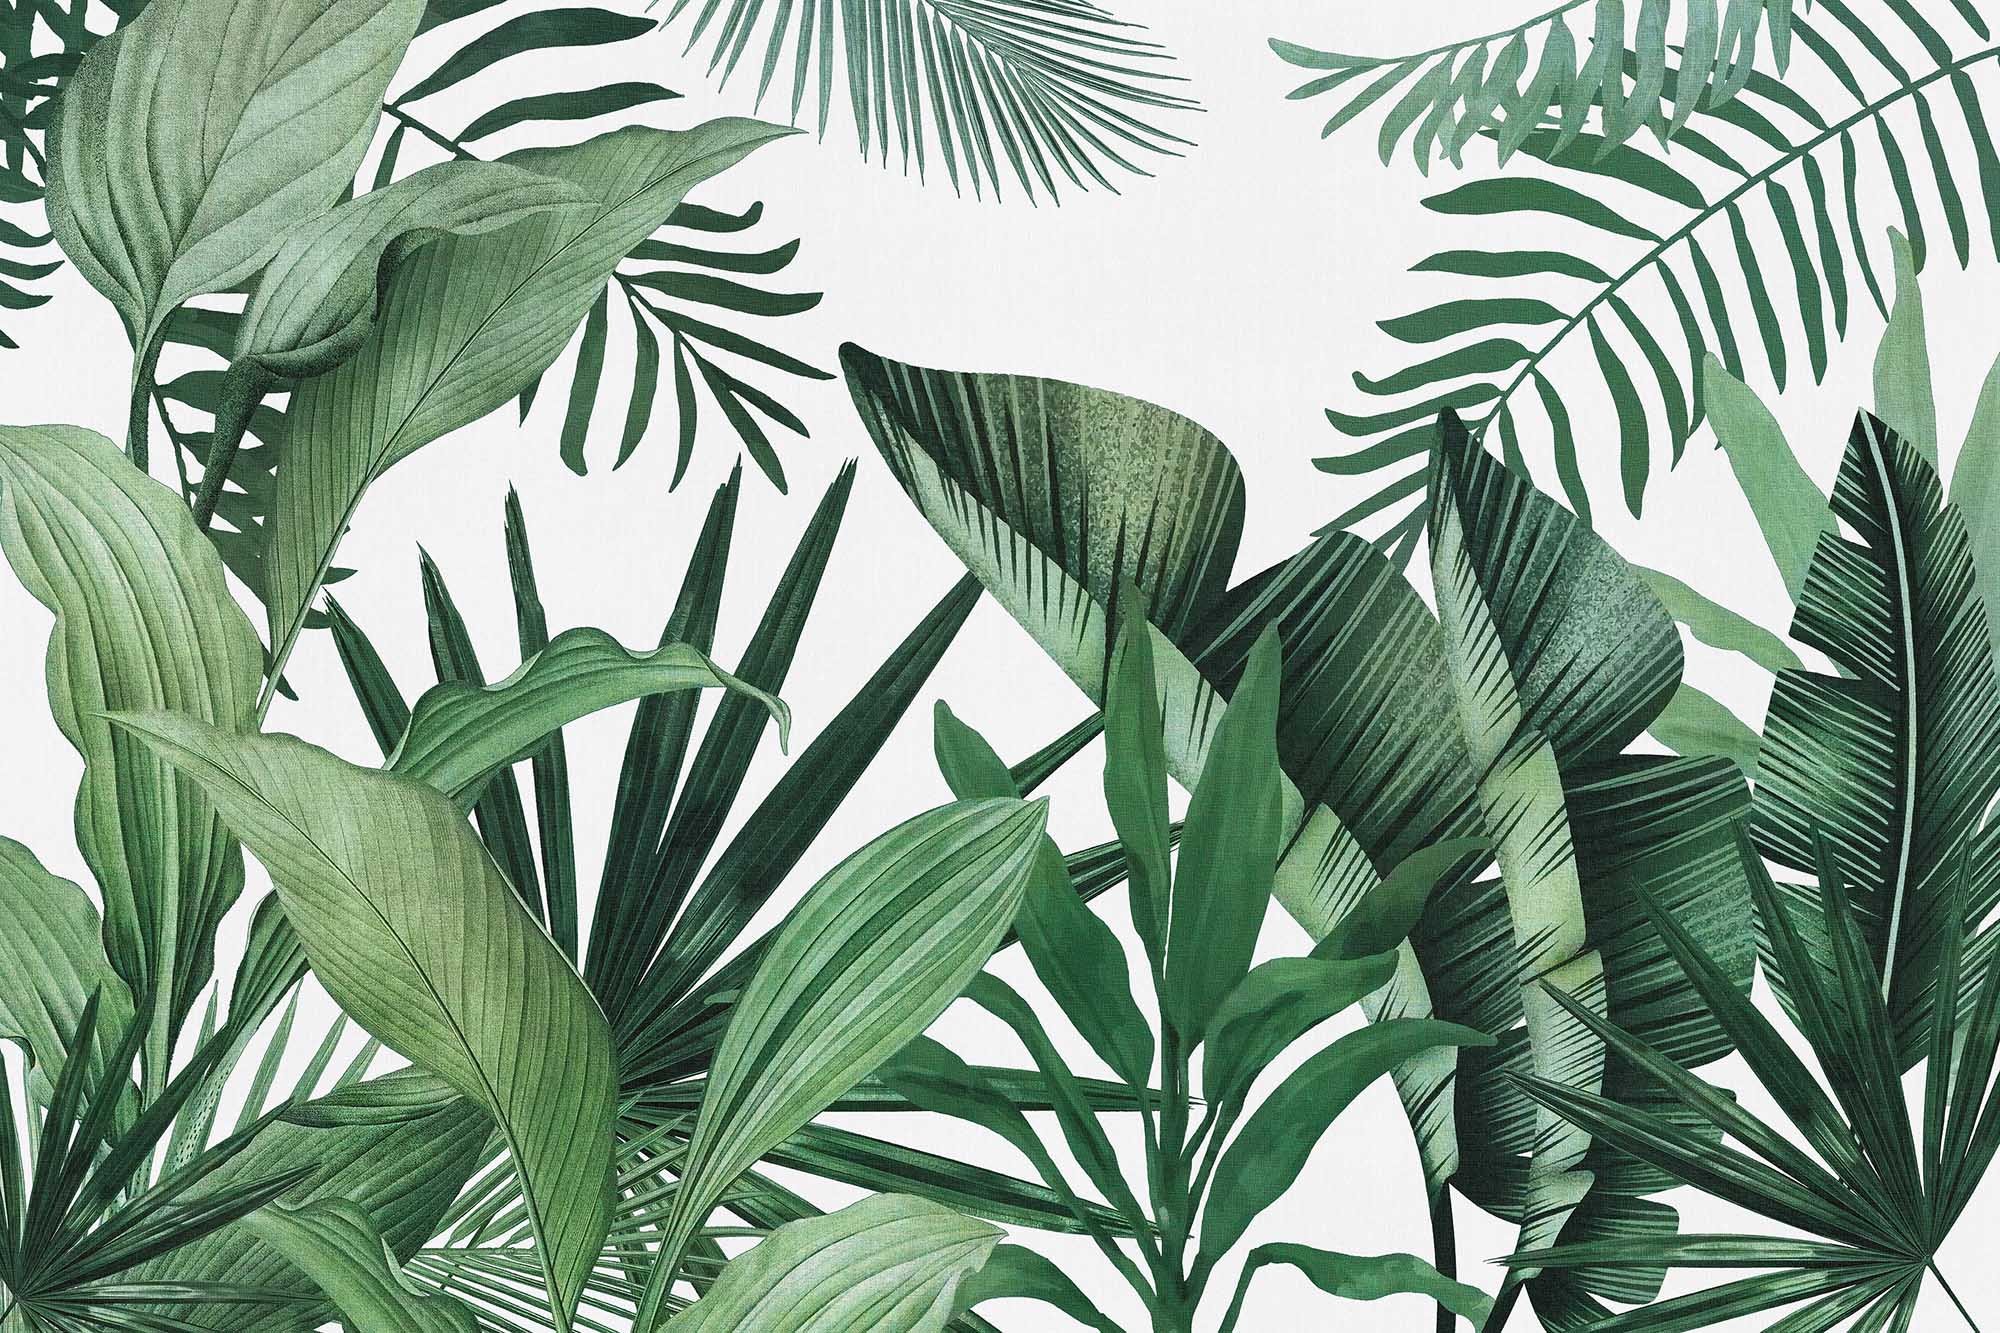 Wallpaper Mural Green Tropical Leaves on White Background (Canvas Texture)  | Muralunique